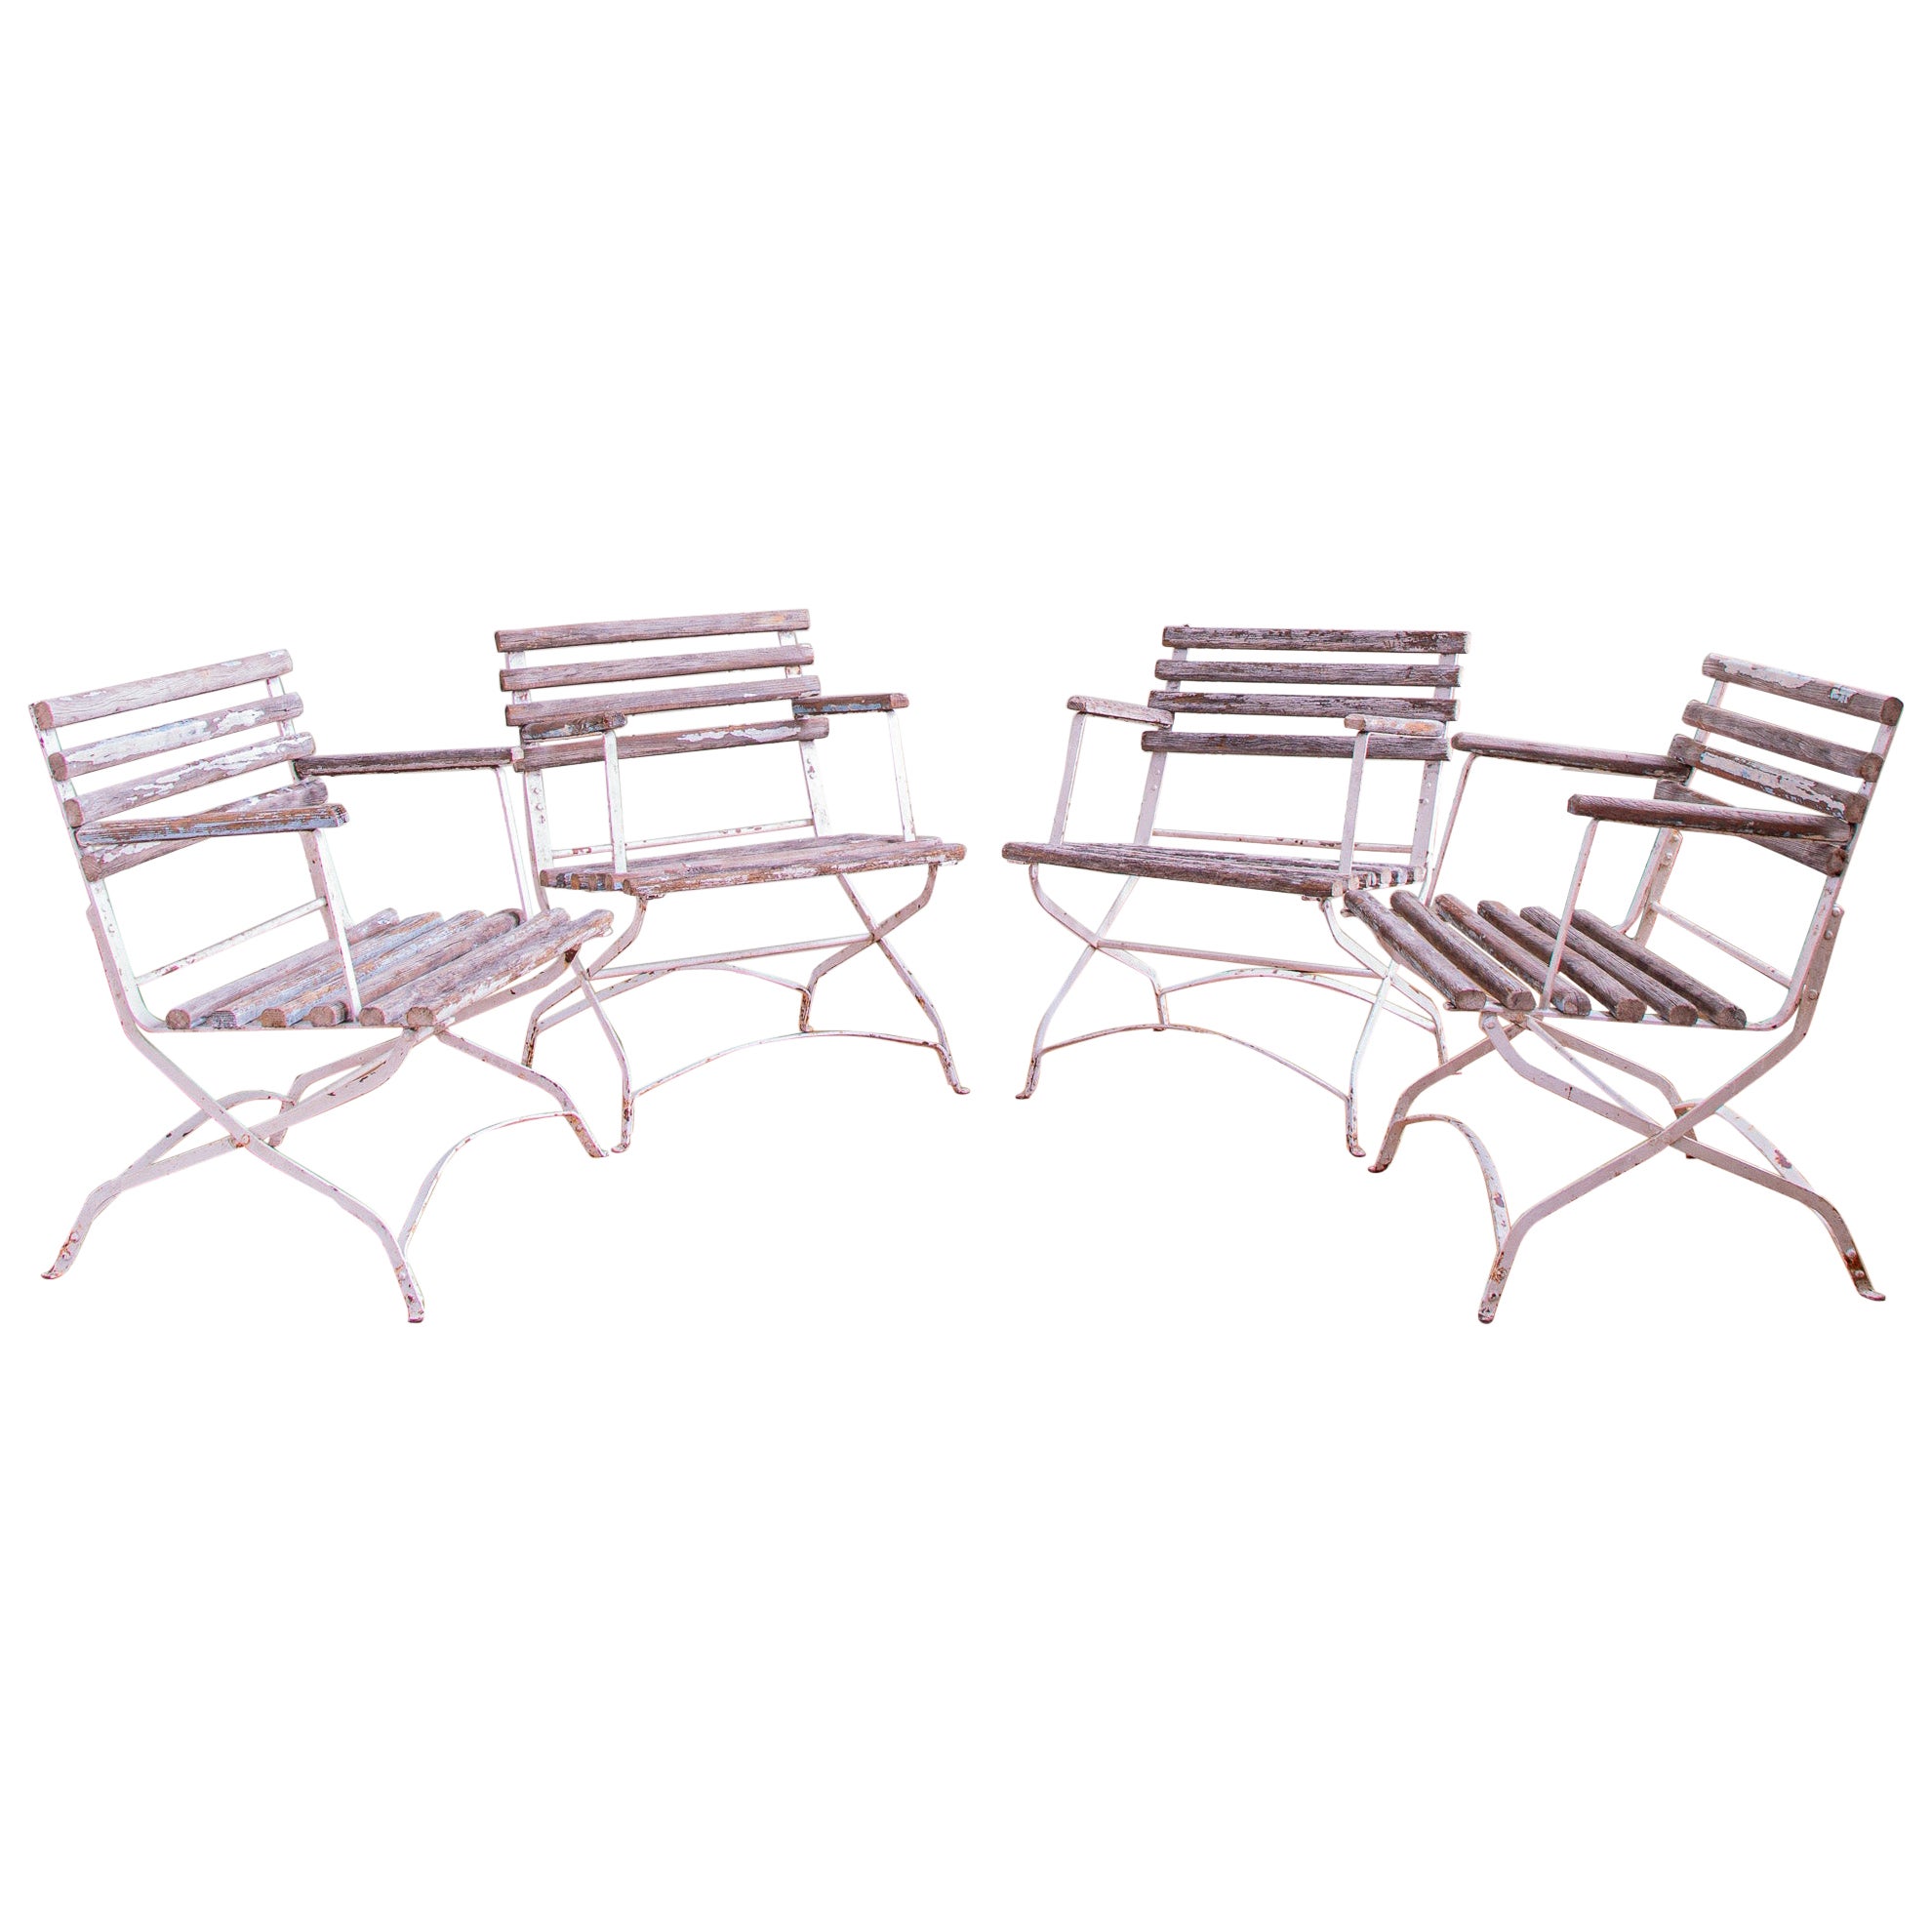  Set of 4 French Wood Slatted Garden Armchairs With Metal Frame  For Sale